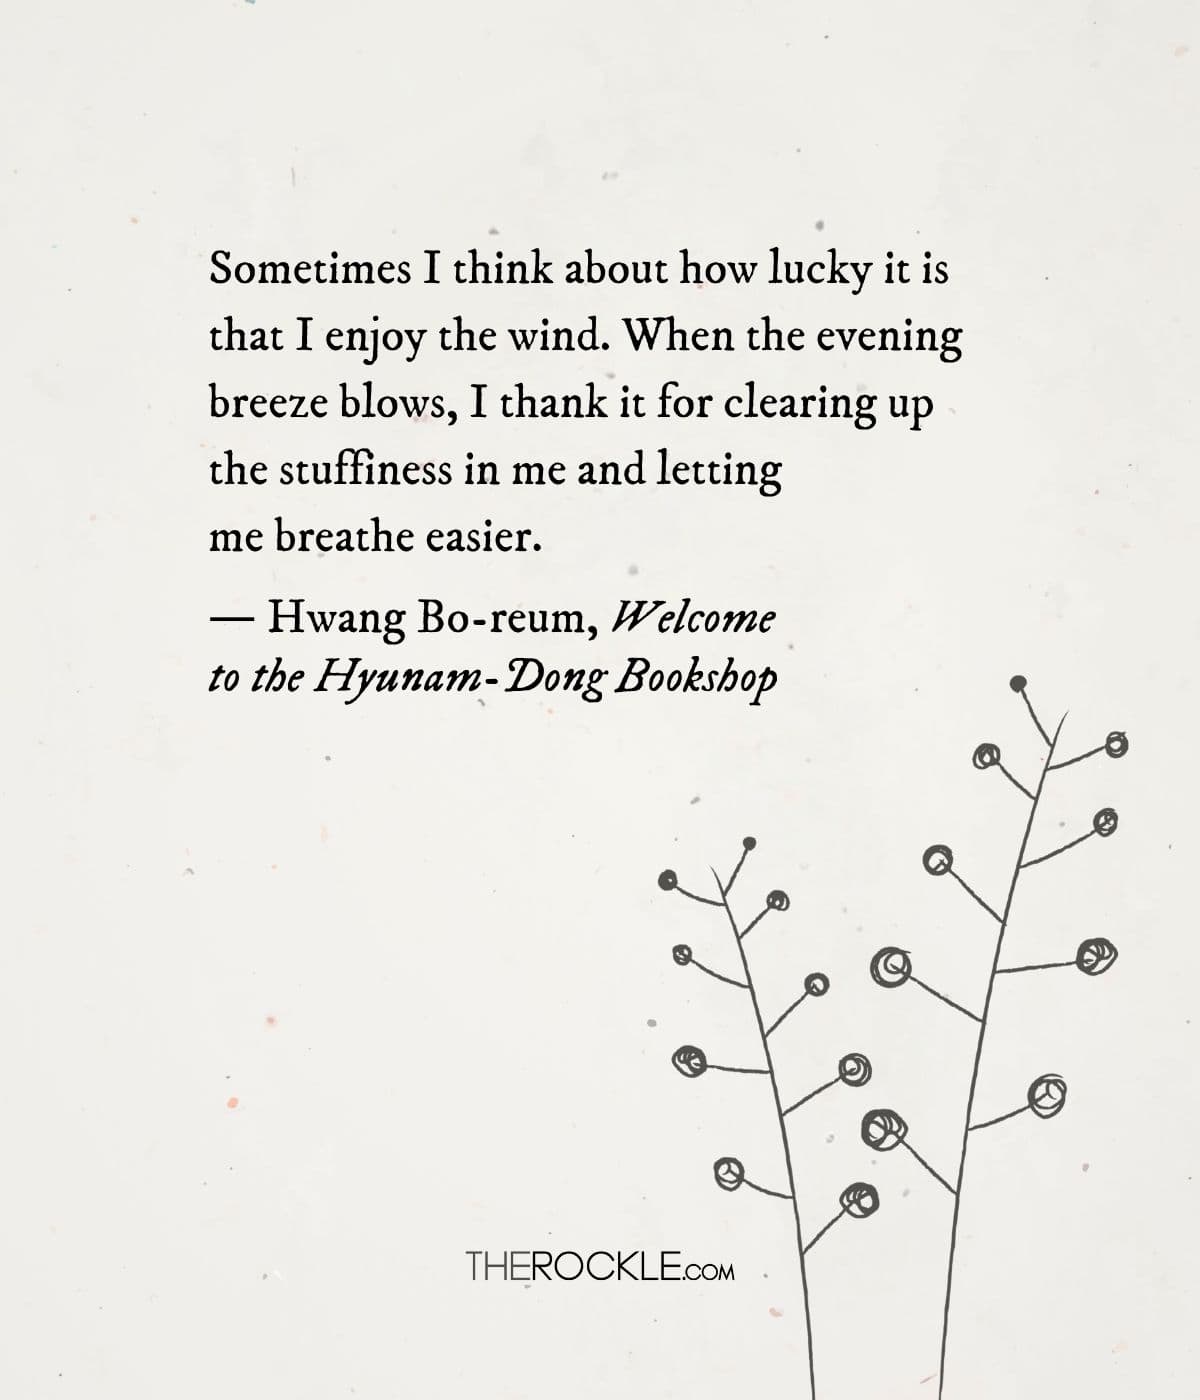 Hwang Bo-reum's book quote on finding solace in simple pleasures